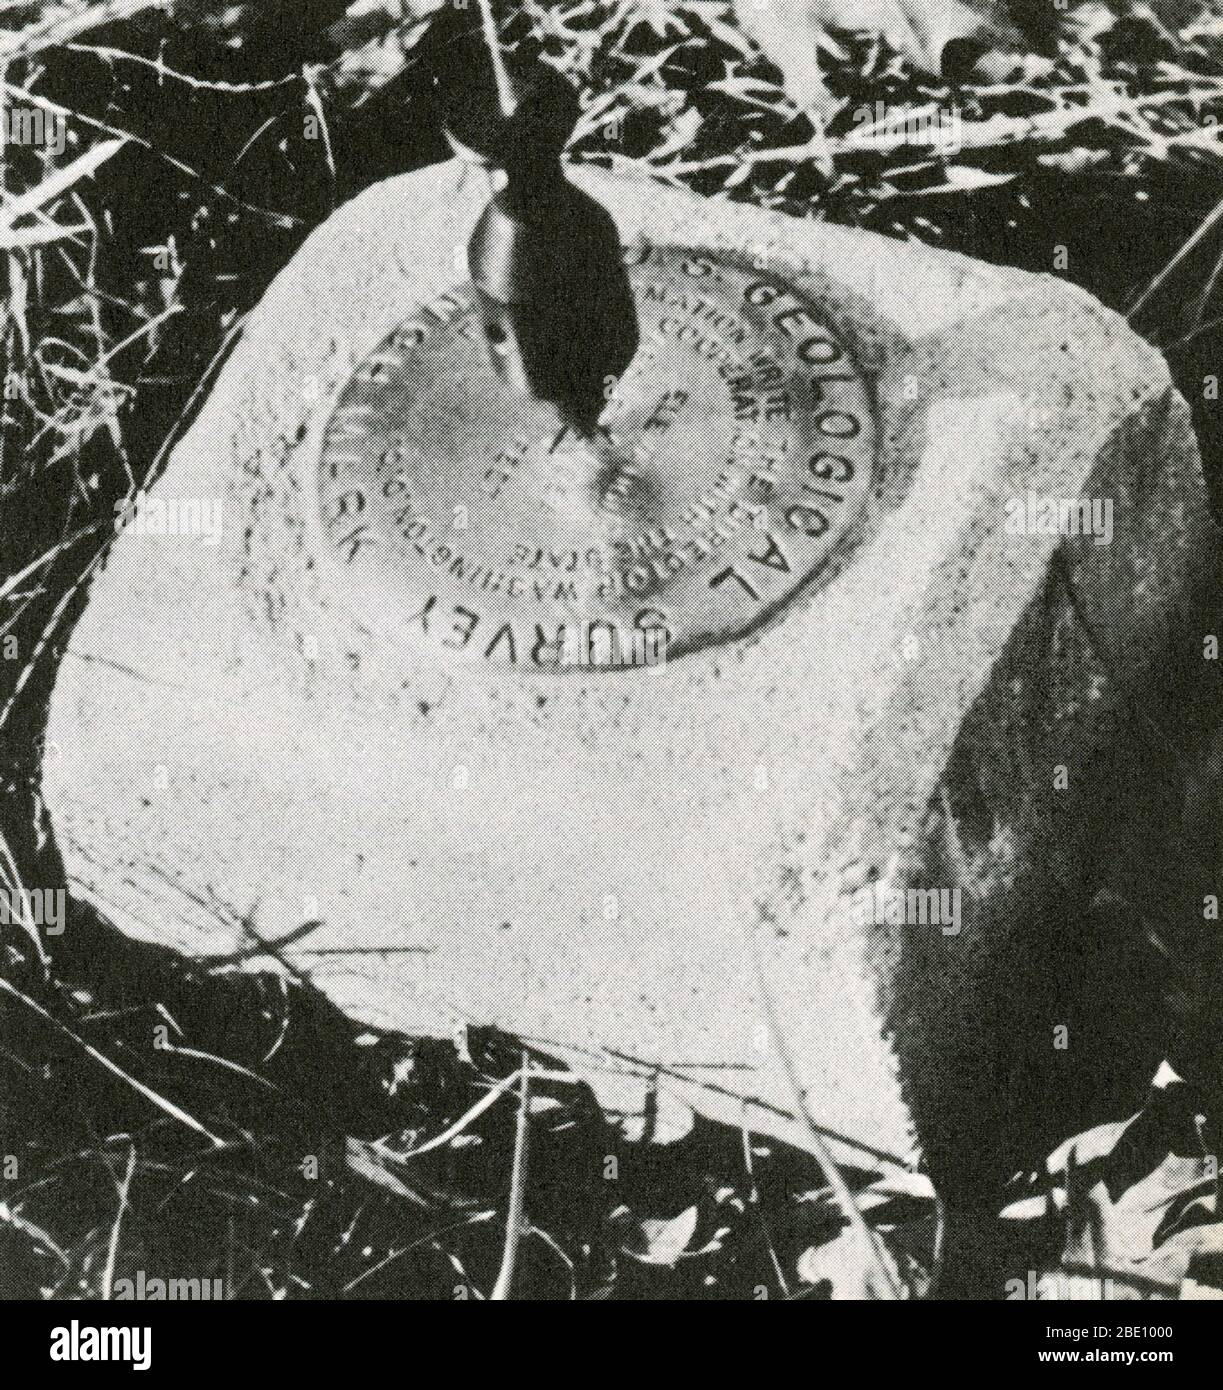 Close up of a benchmark, with a surveyor's plumb-bob visible, hanging above. The benchmark acts as a point of reference for any future measurements. Stock Photo